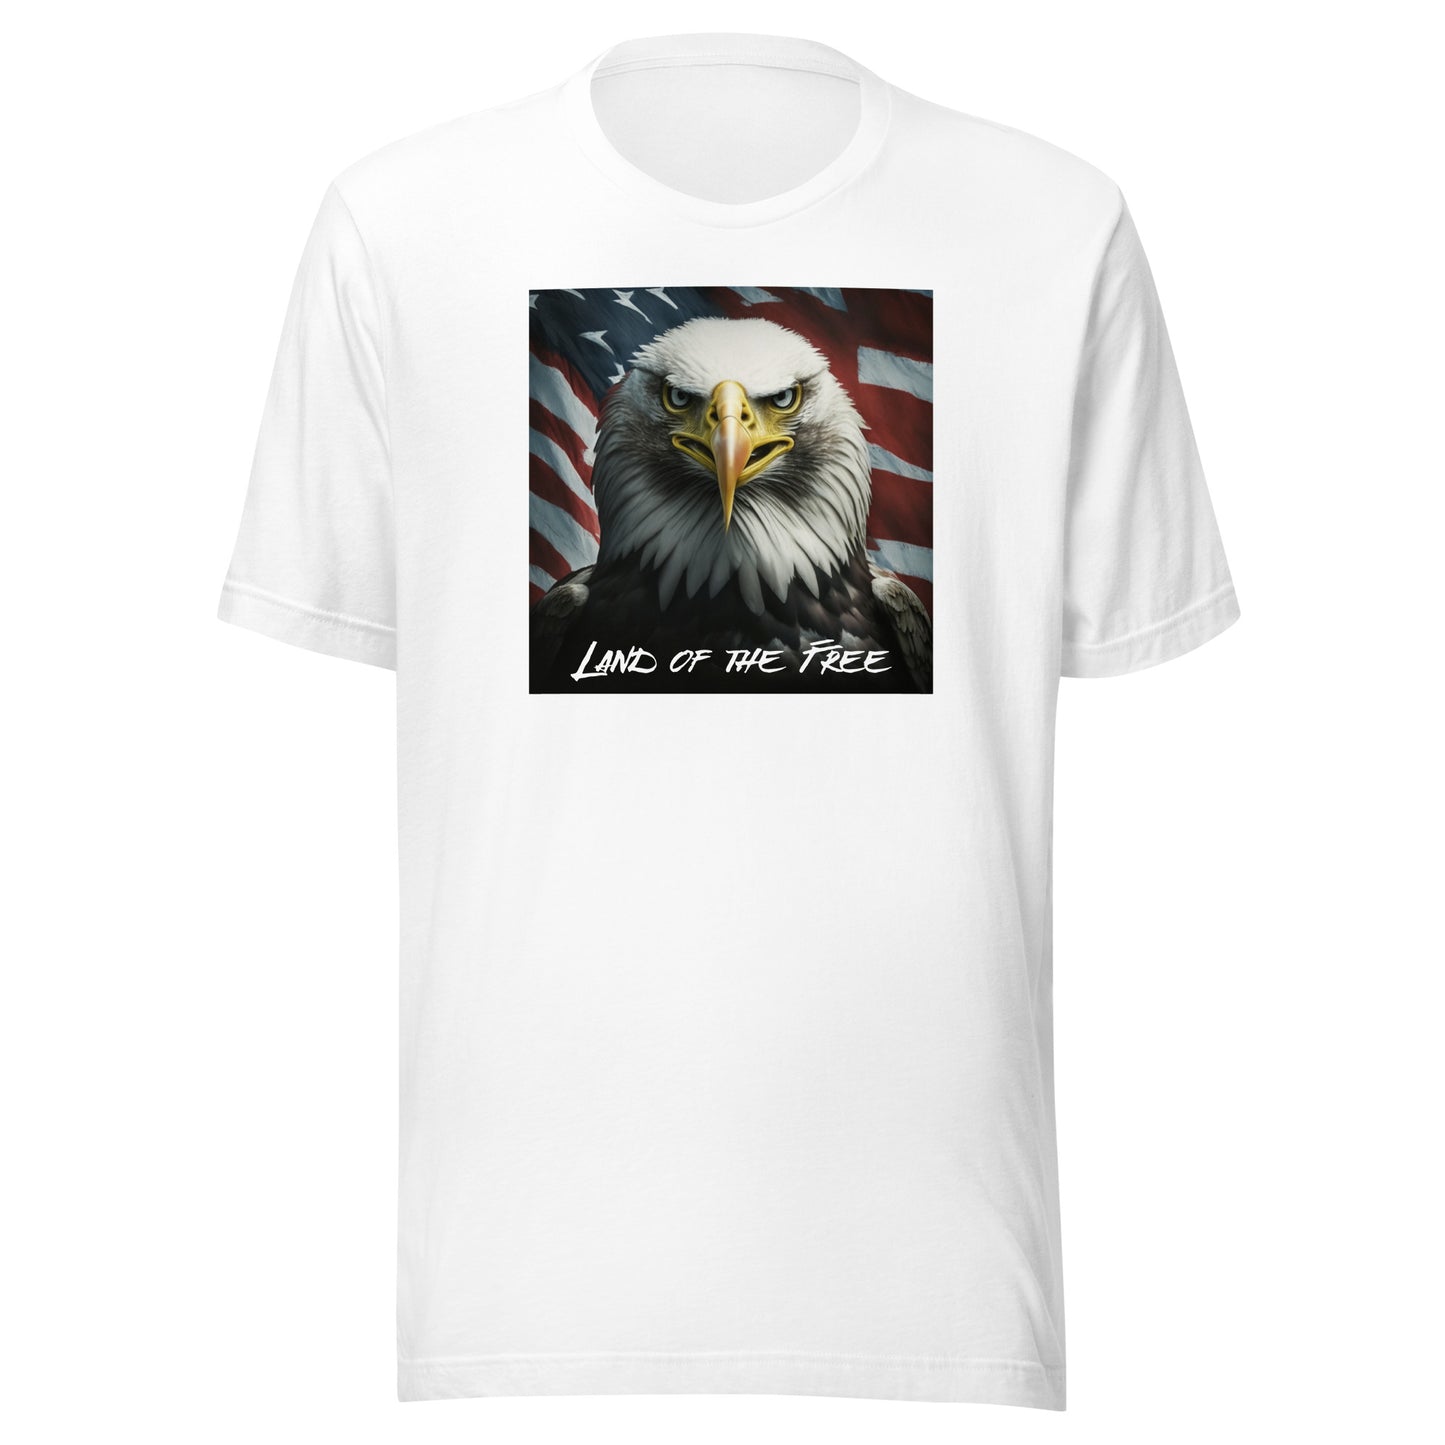 Land of the Free Graphic T-Shirt White